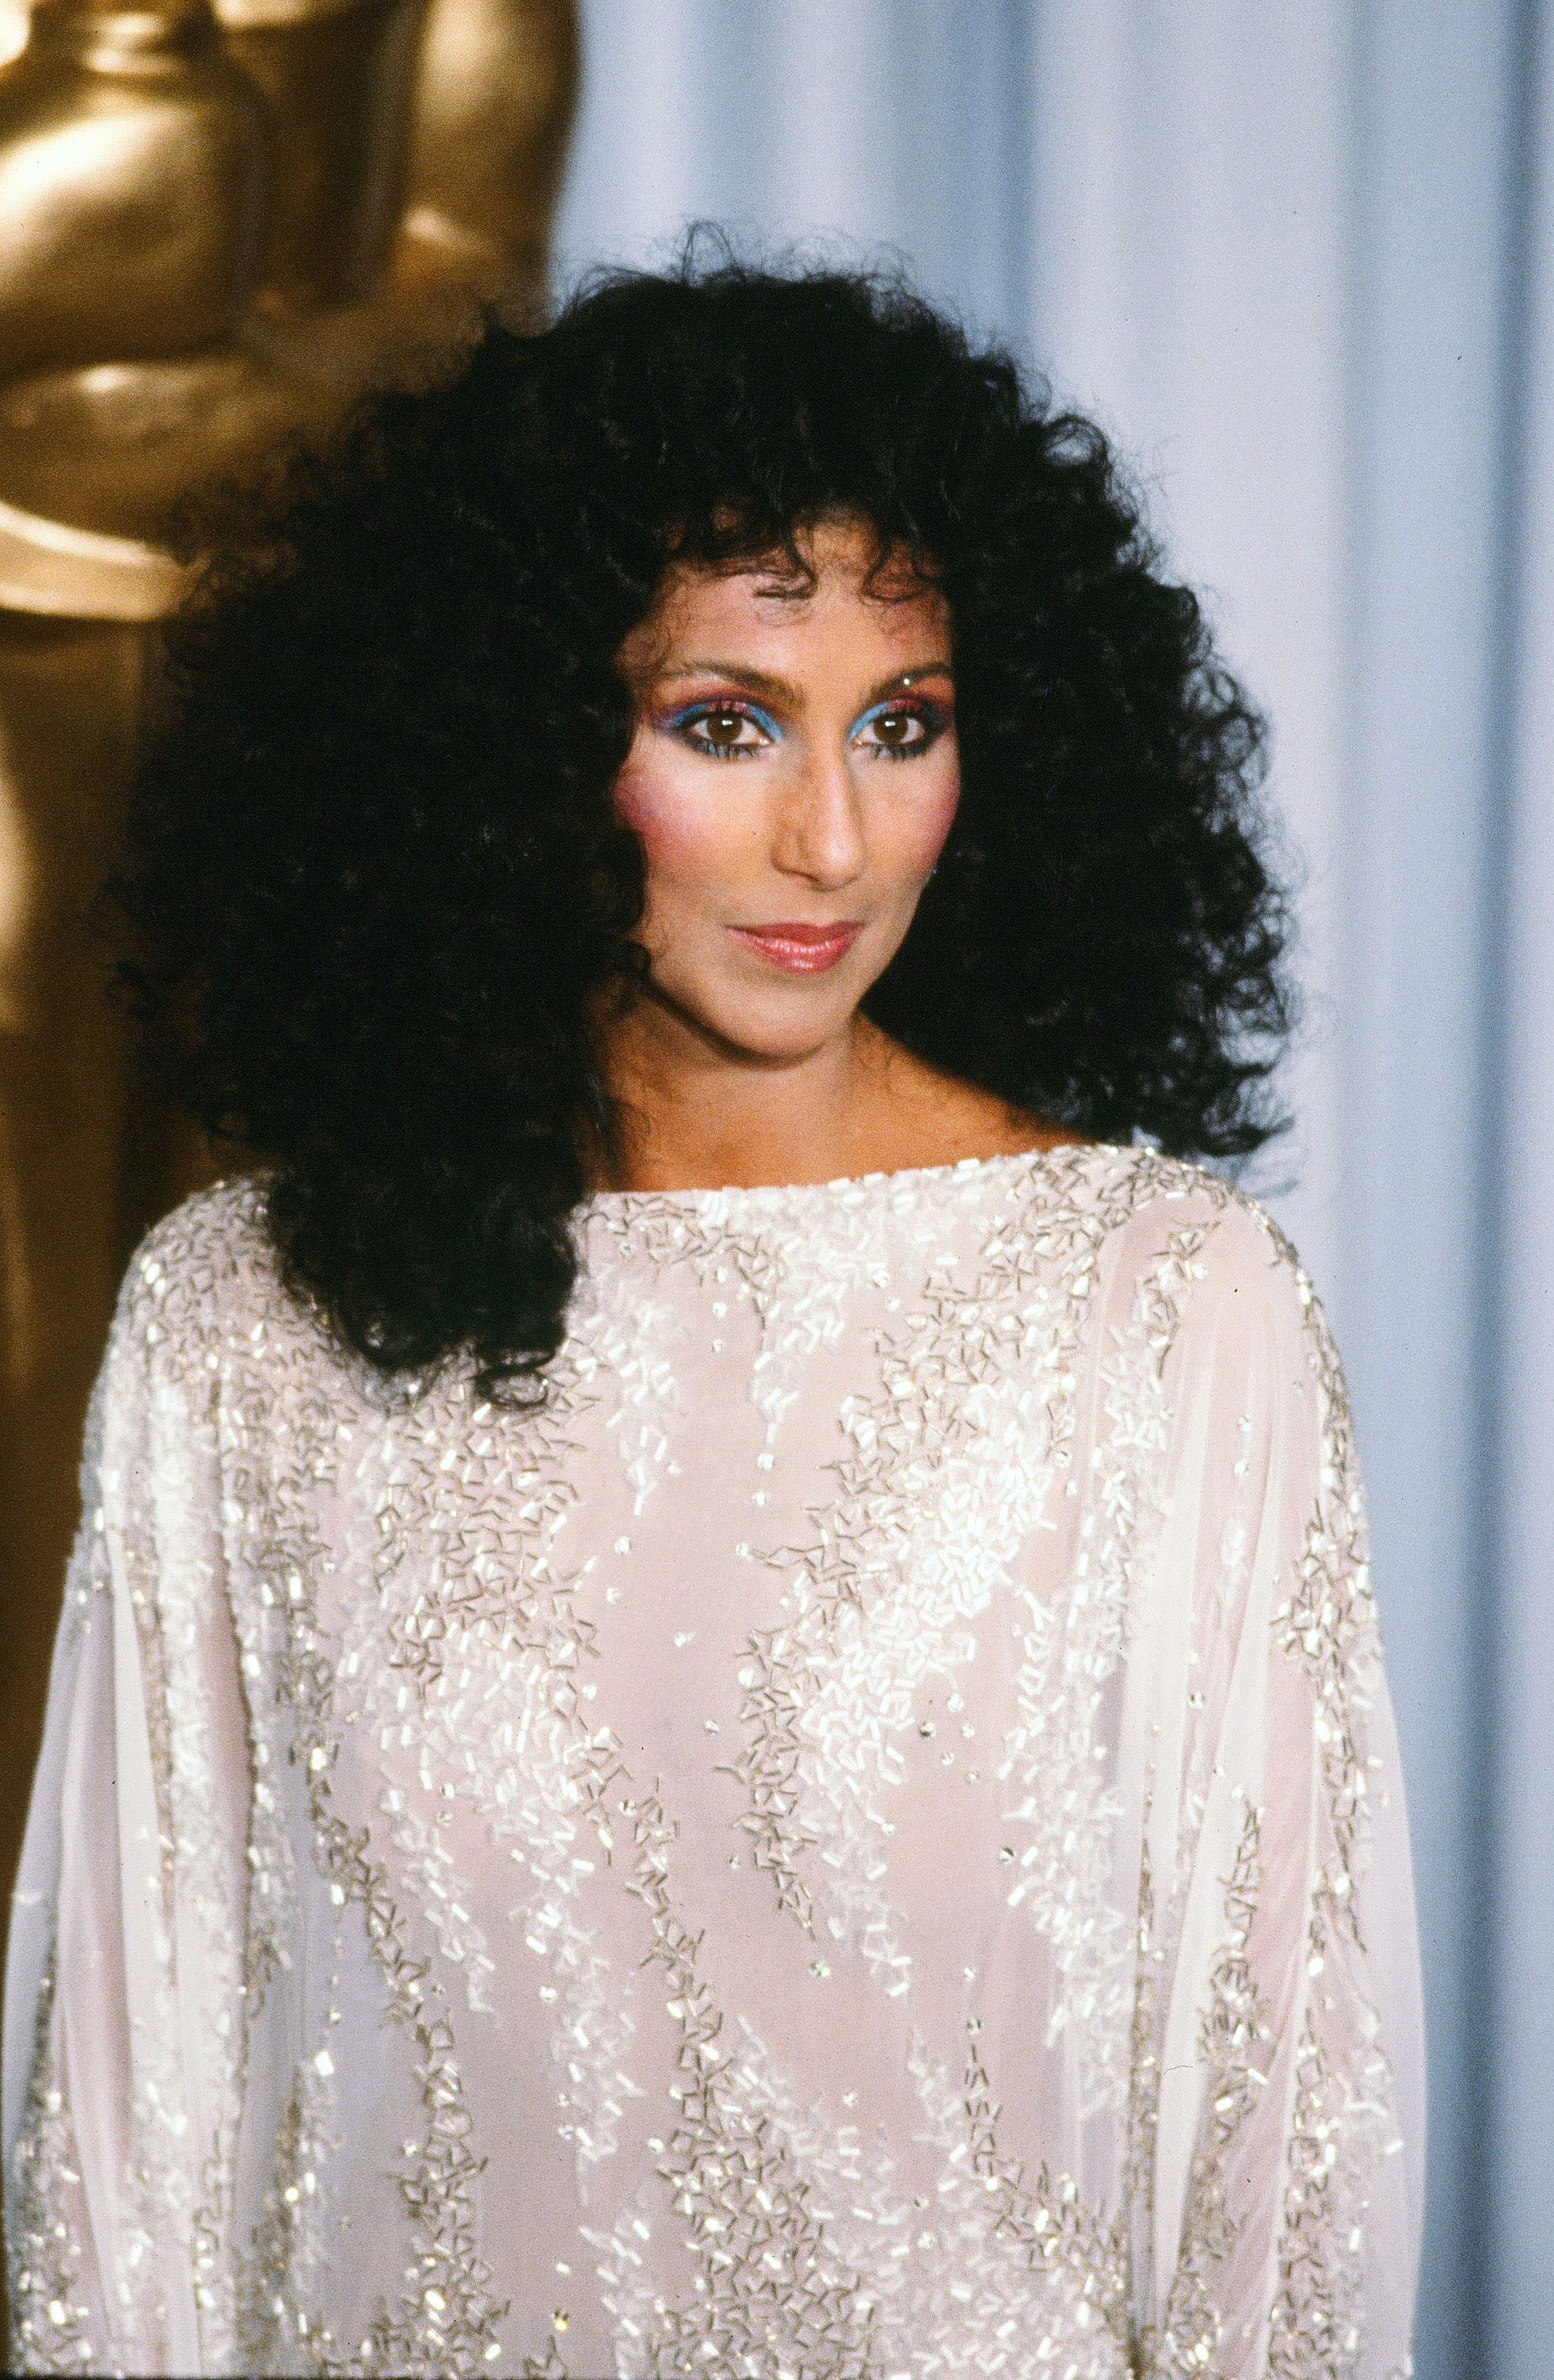 Cher in Los Angeles, California on April 11, 1983 | Source: Getty Images